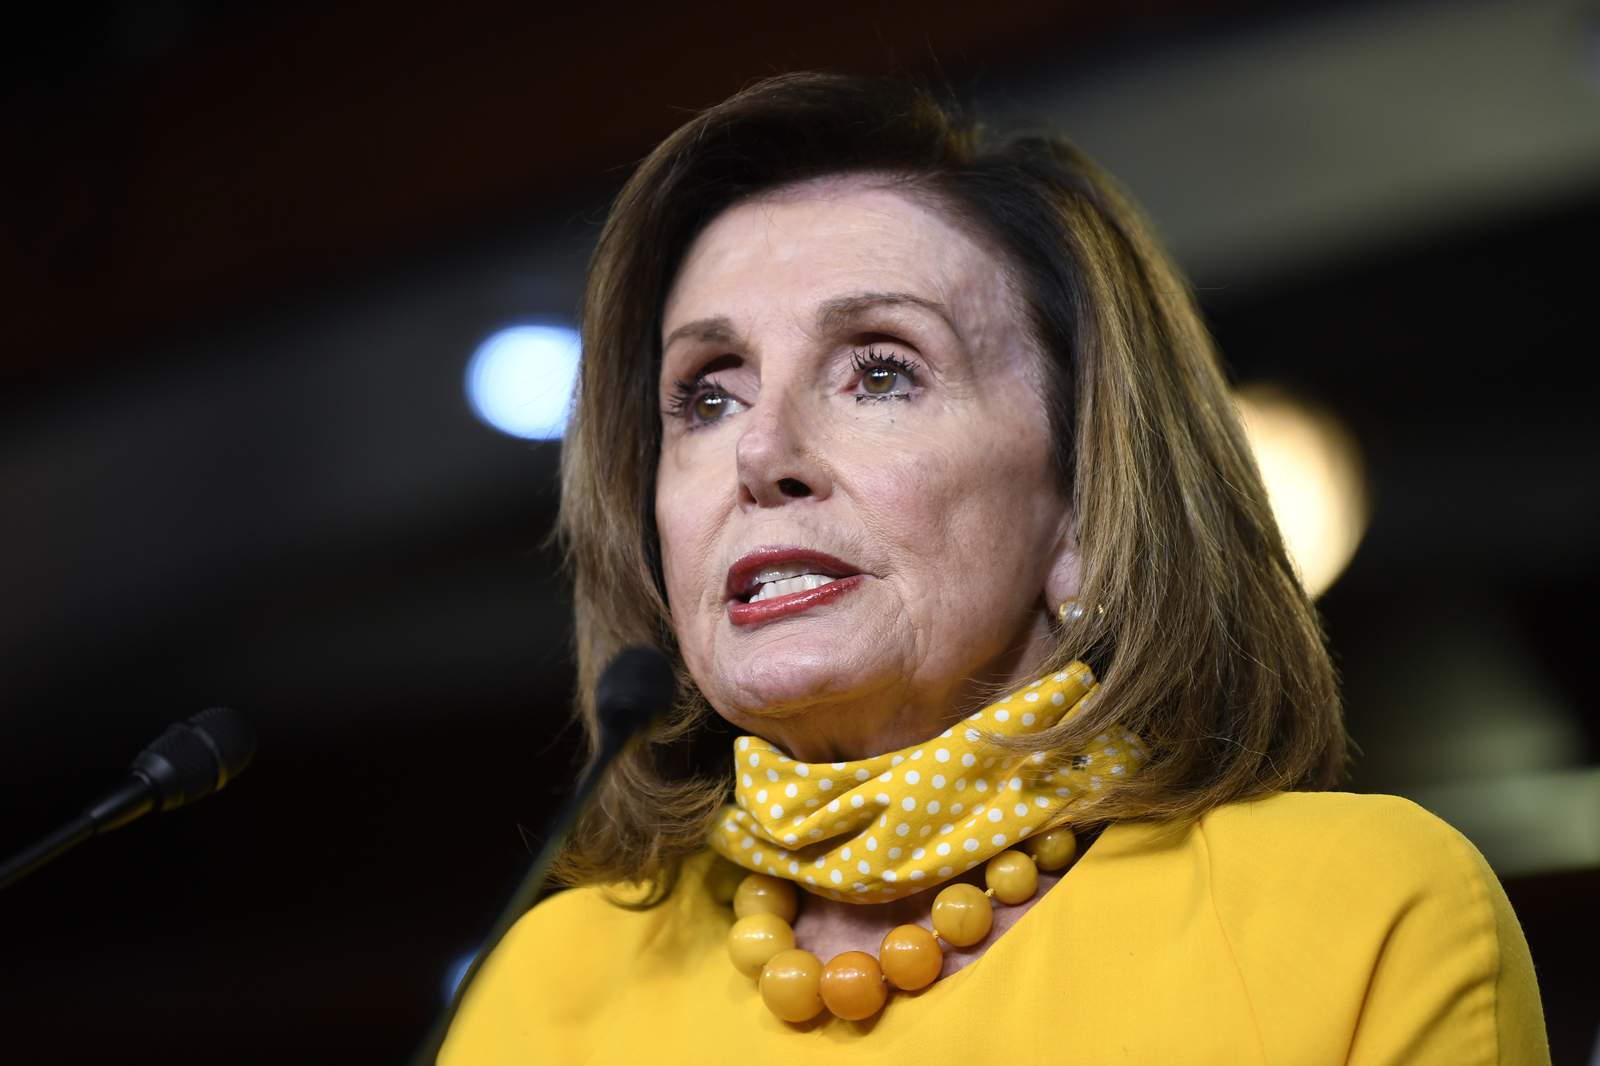 Pelosi requiring masks for lawmakers for House hearings